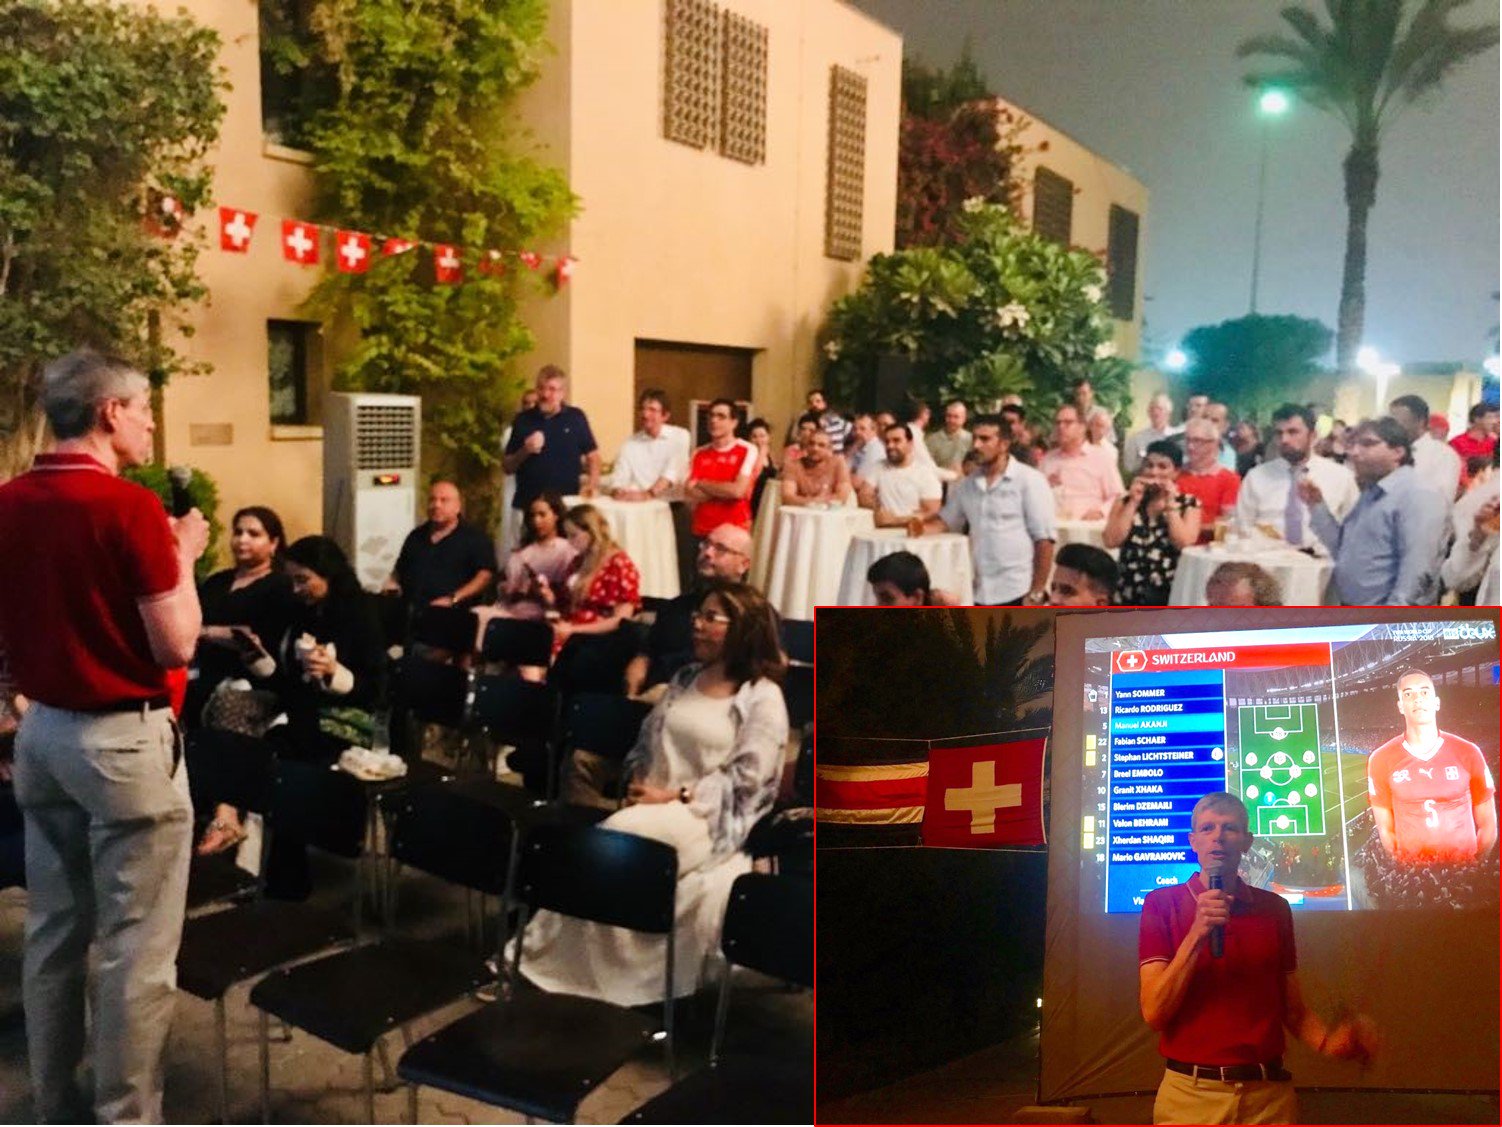 Swiss Embassy Riyadh on X: "Congratulations! #Swiss football team @SFV_ASF made it A well-deserved qualification! The Embassy of #Switzerland in celebrated qualification to the next #WorldCup2018 round of 16 Now